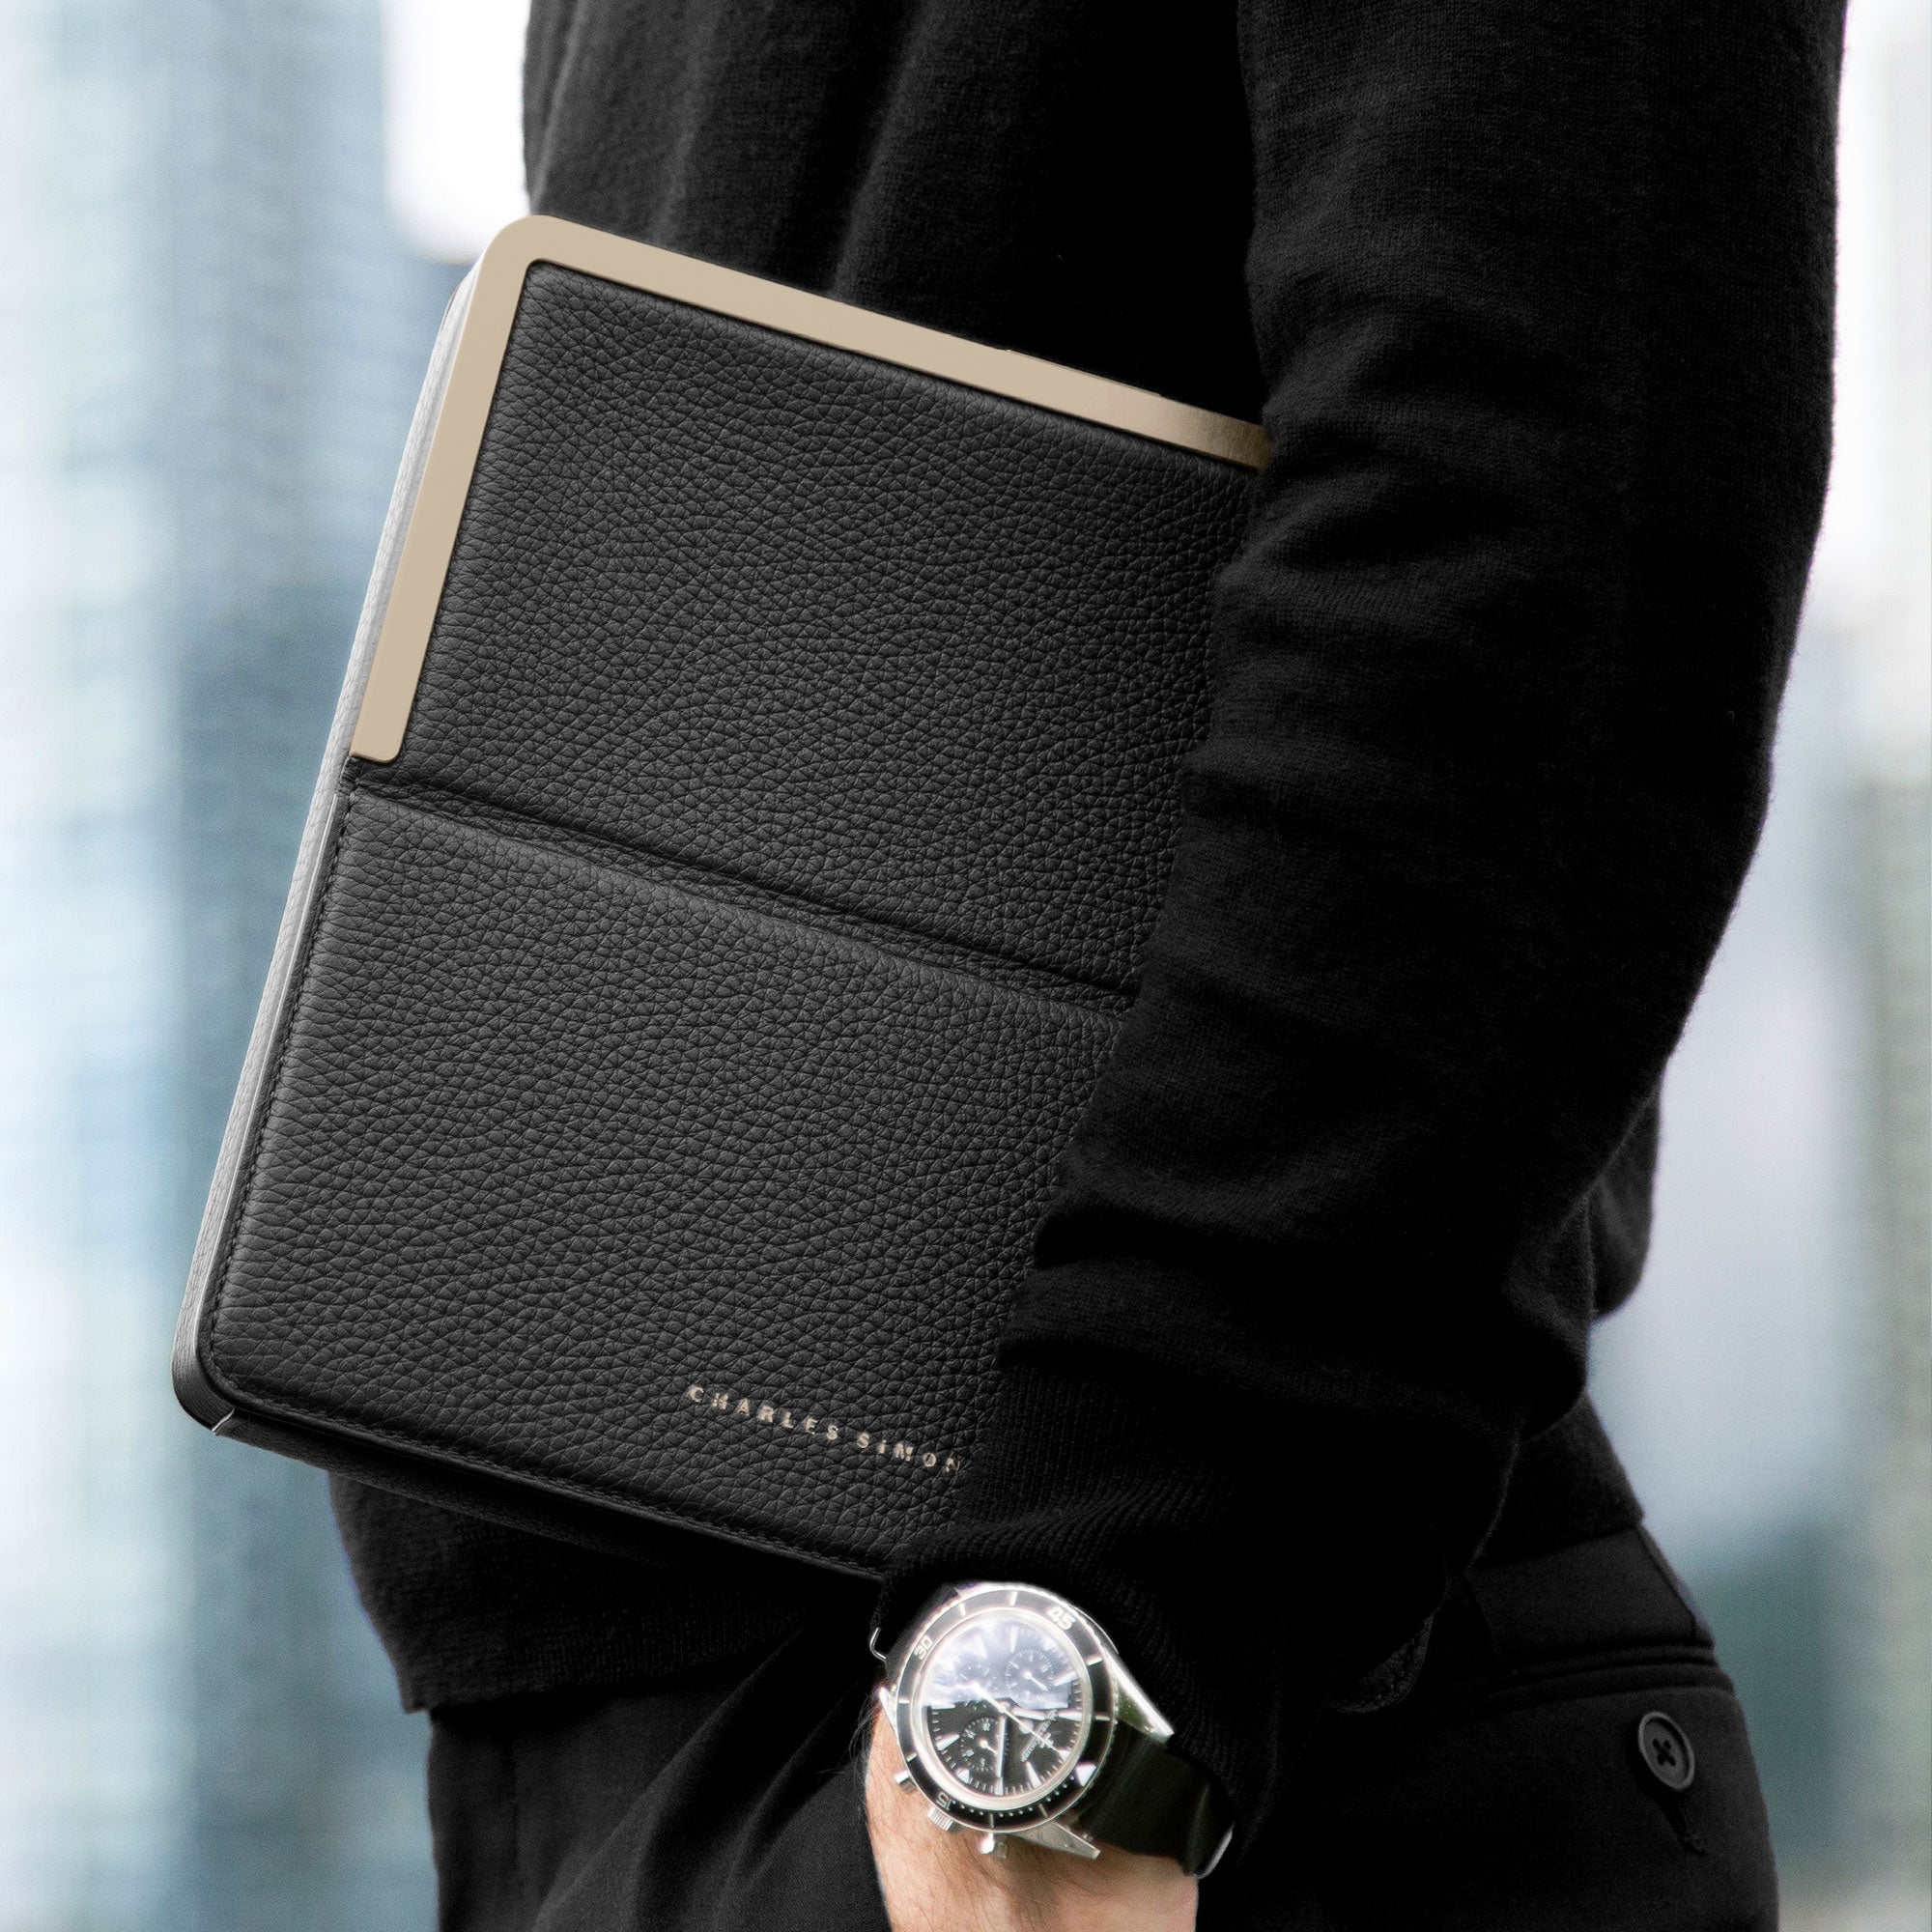 Lifestyle photo of stylish business man holding his luxury travel wallet in black leather and gold